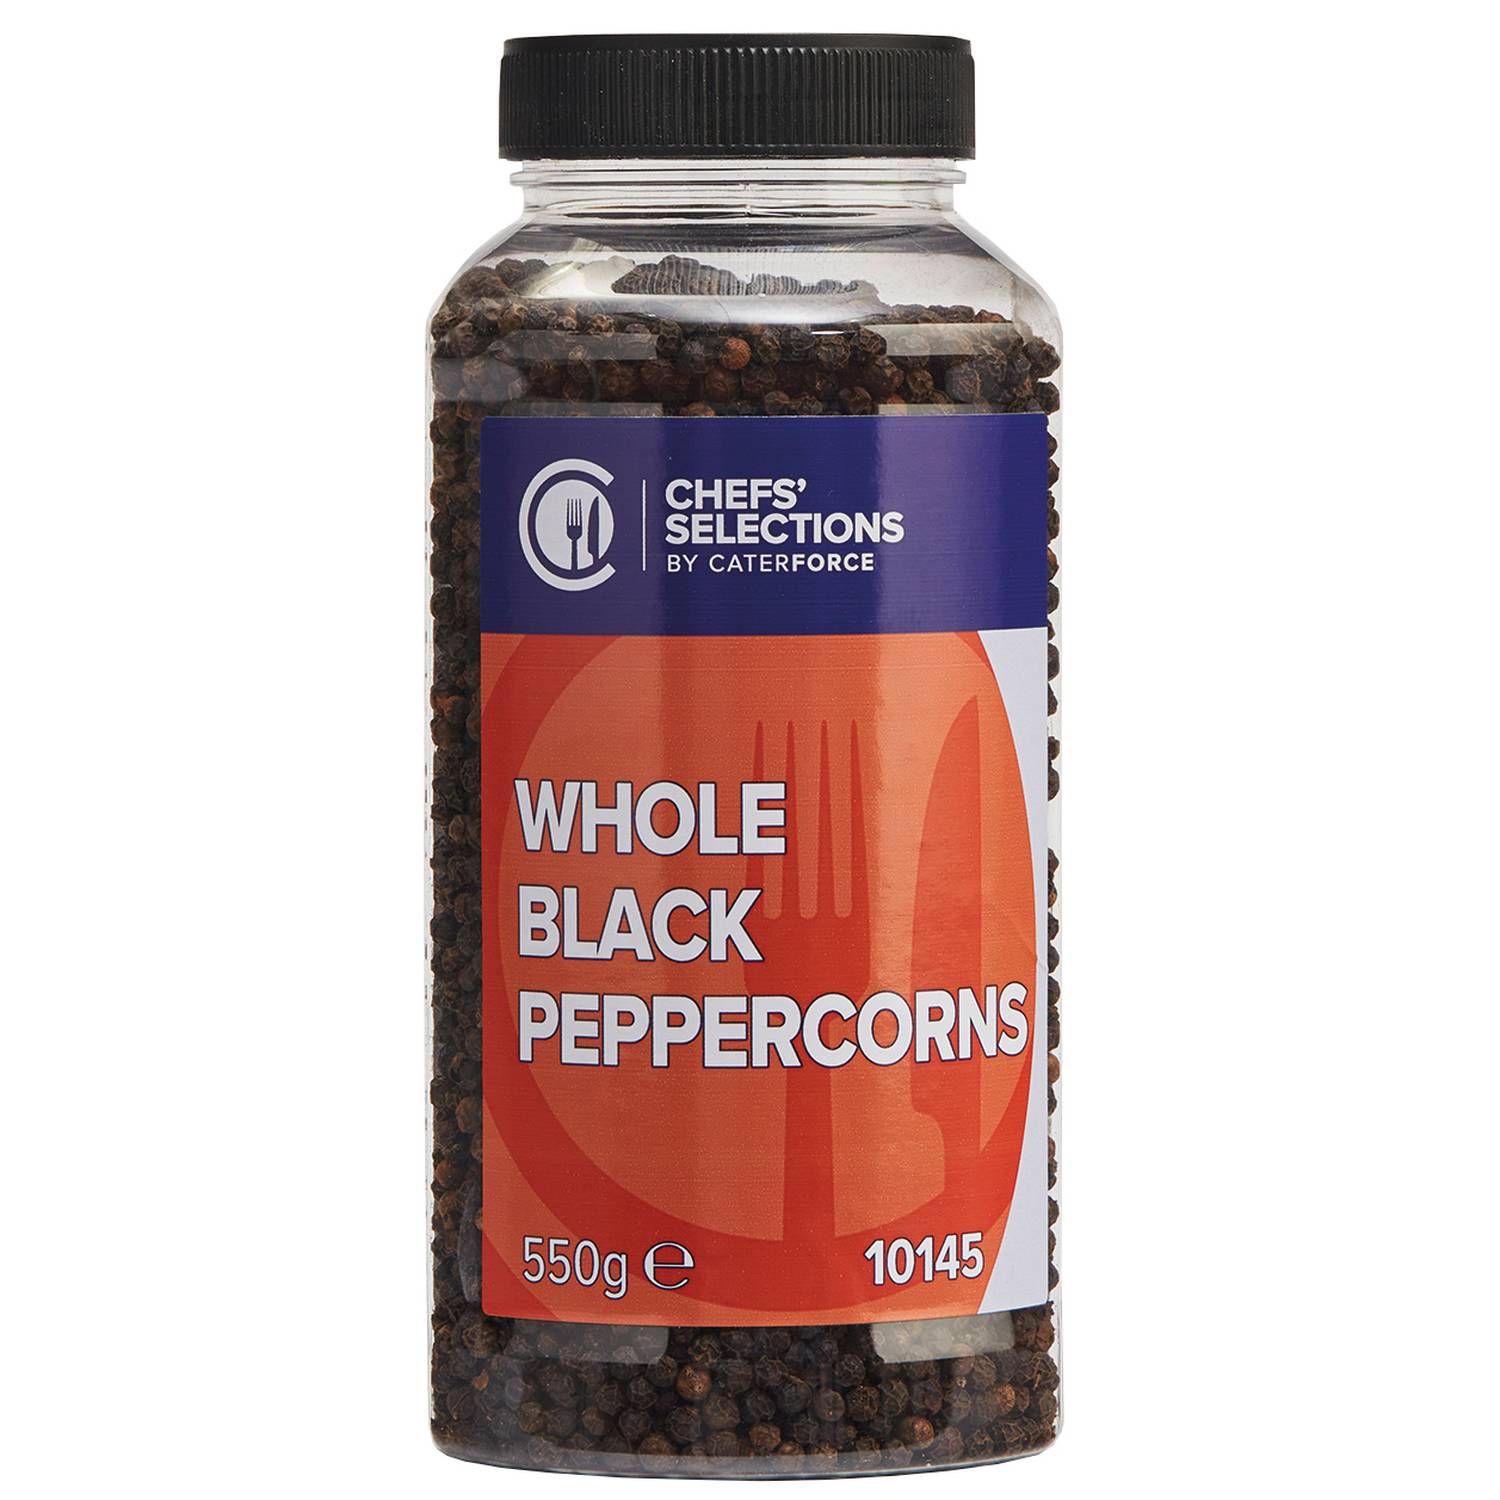 Chefs’ Selections Whole Black Peppercorns (6 x 550g)